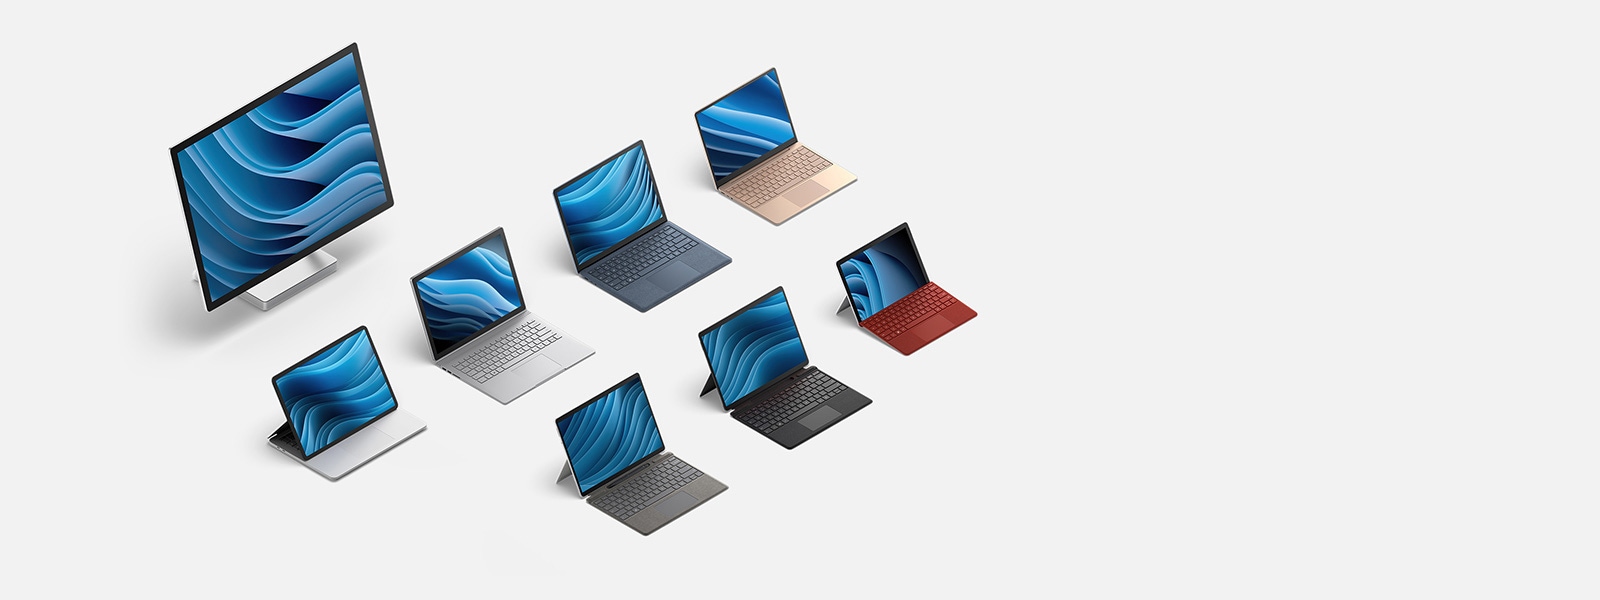 A family of Surface computers